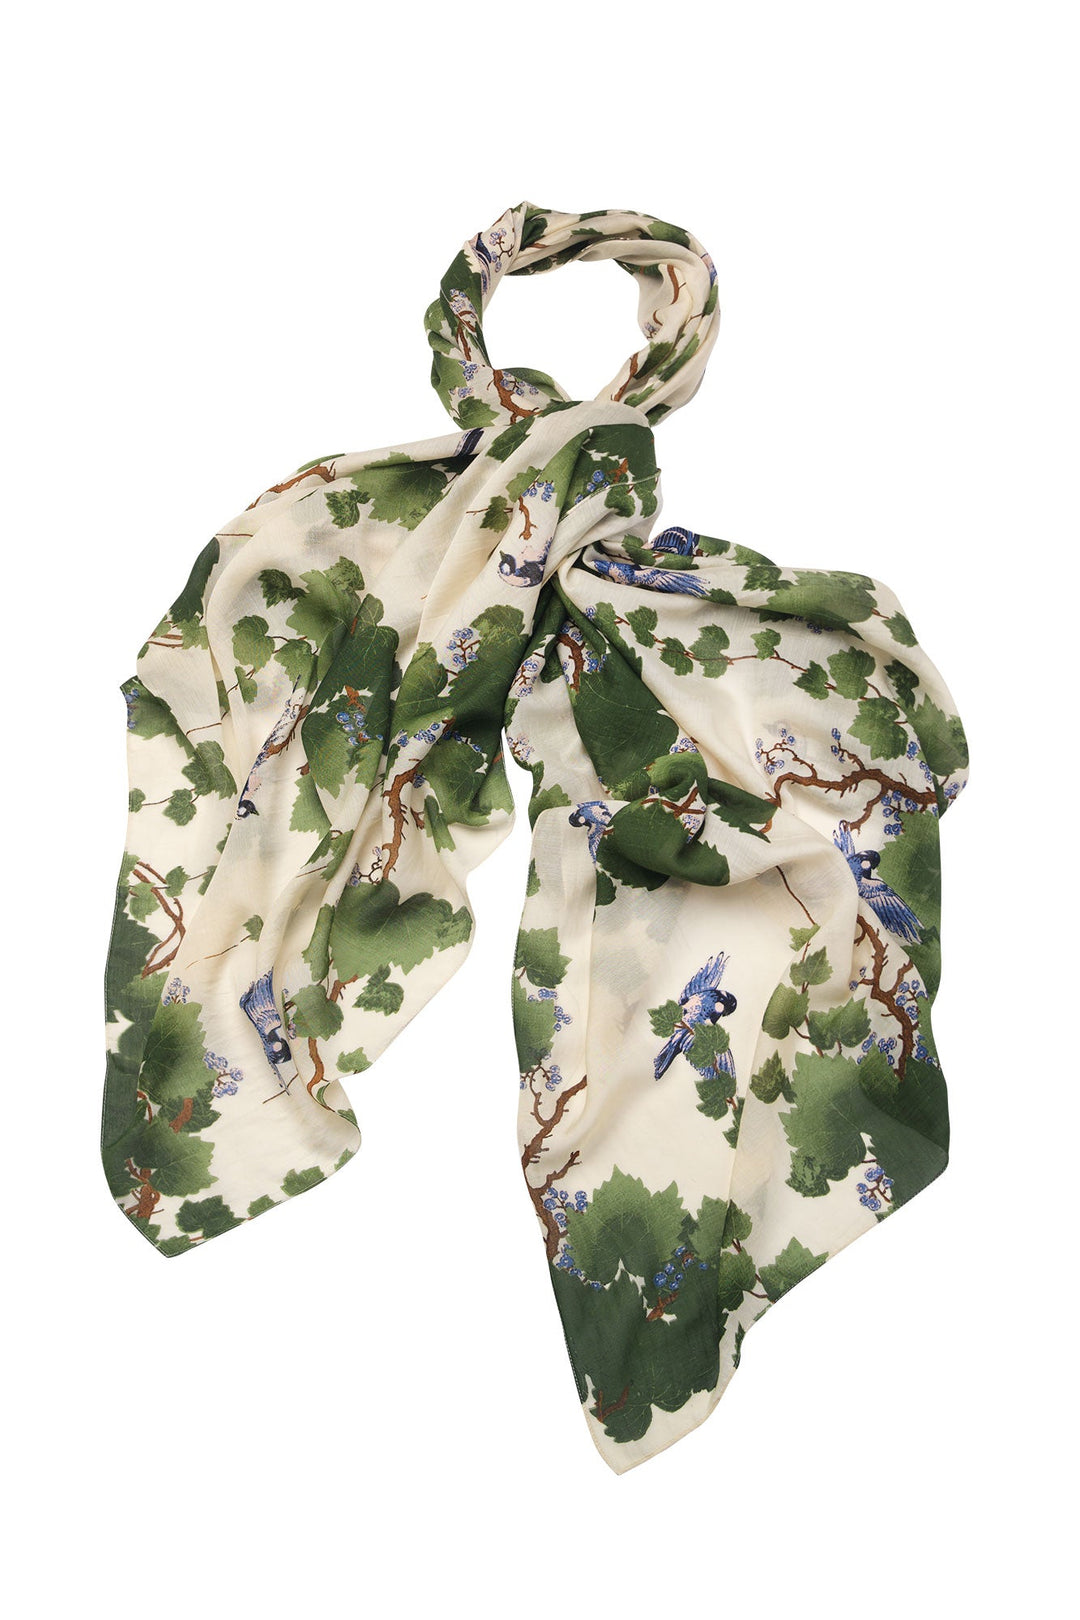 women's accessories. large scarf with acer green print by One Hundred Stars